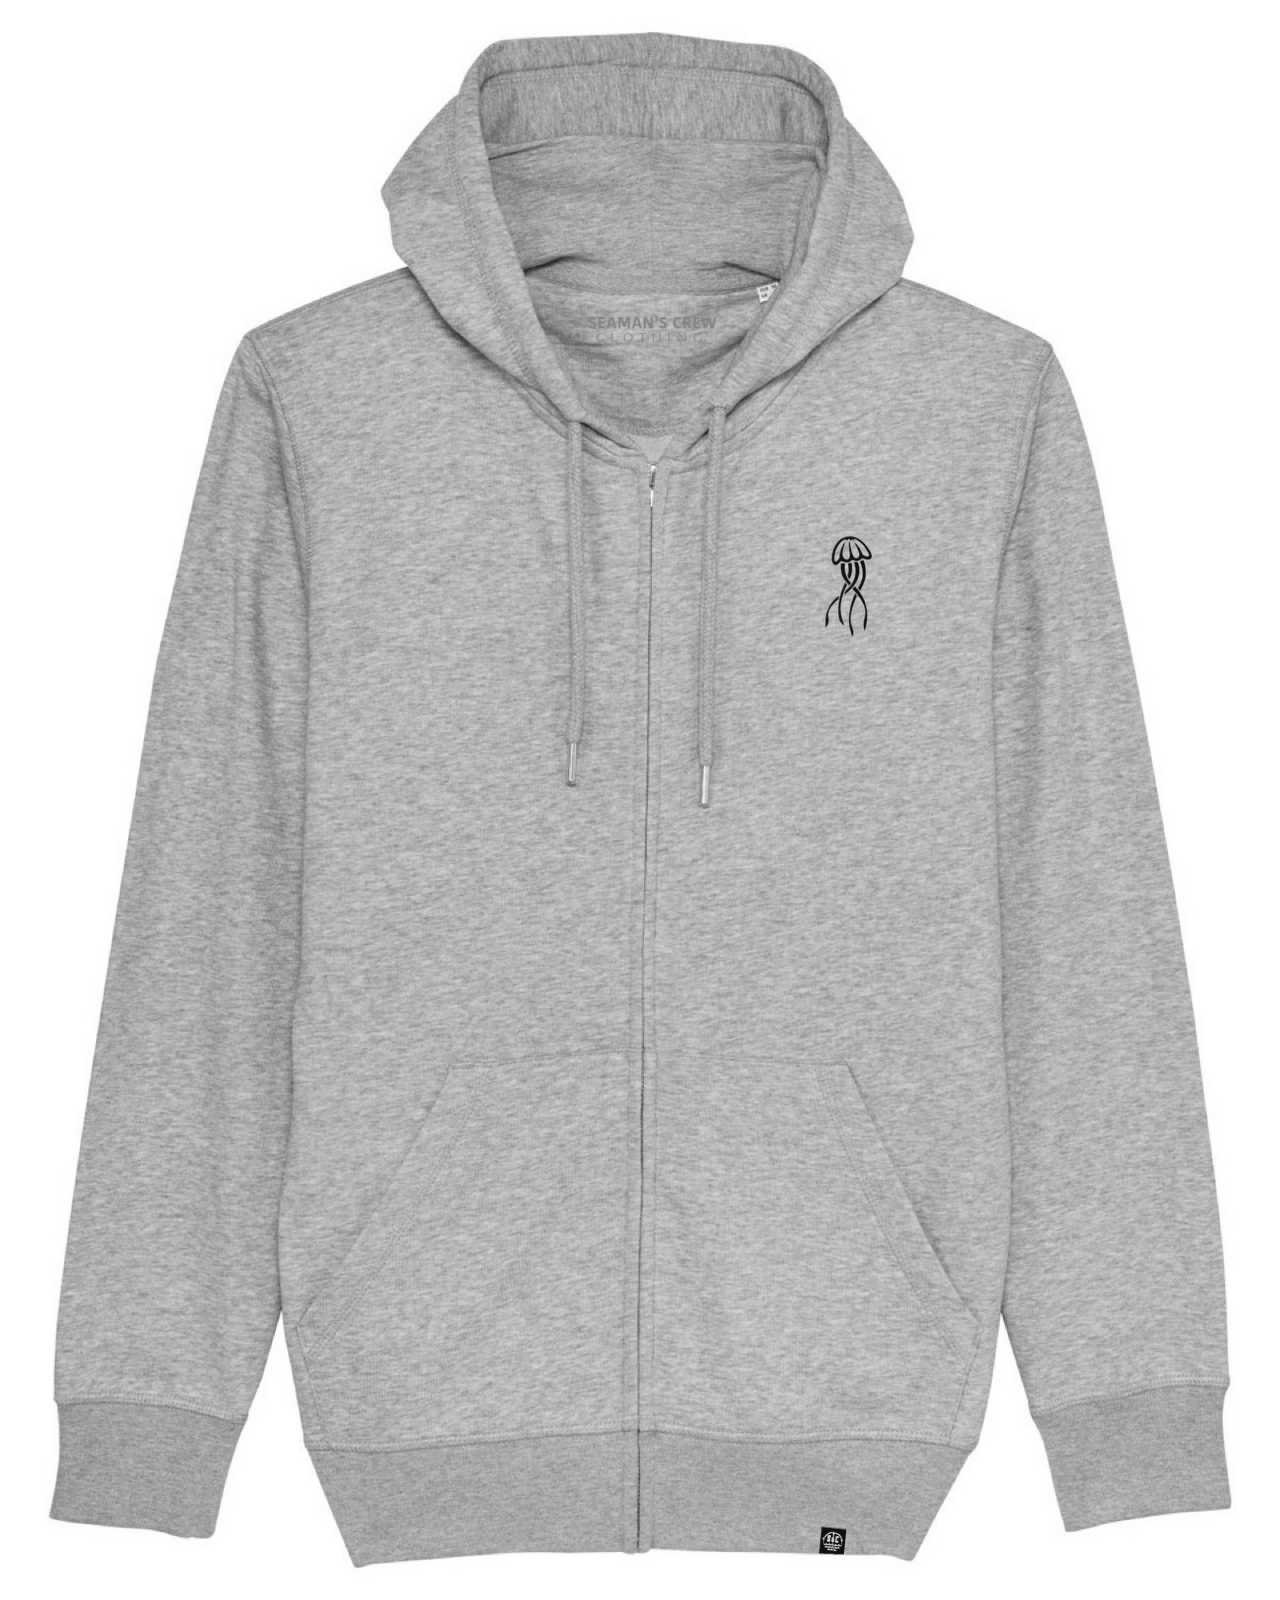 Jelly Embroidery Zip Hoodie - Seaman&